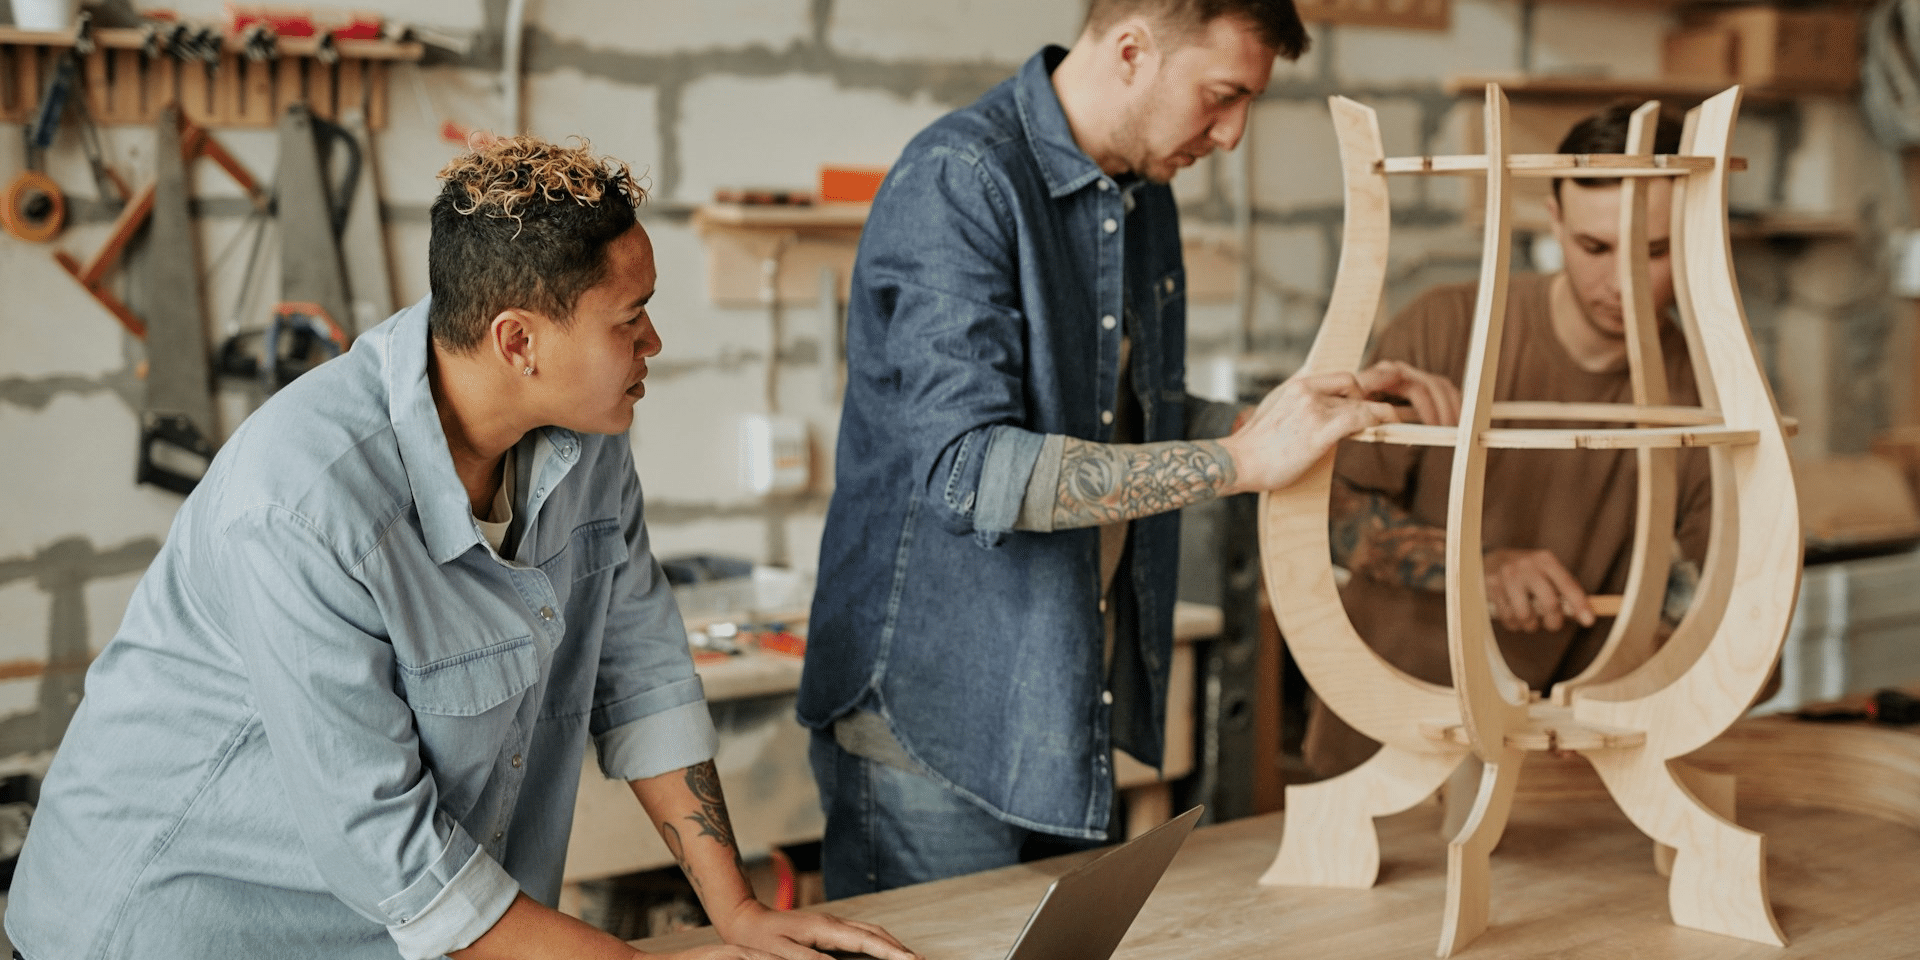 How Carpentry and Technology Co-Exist in the Modern Workshop